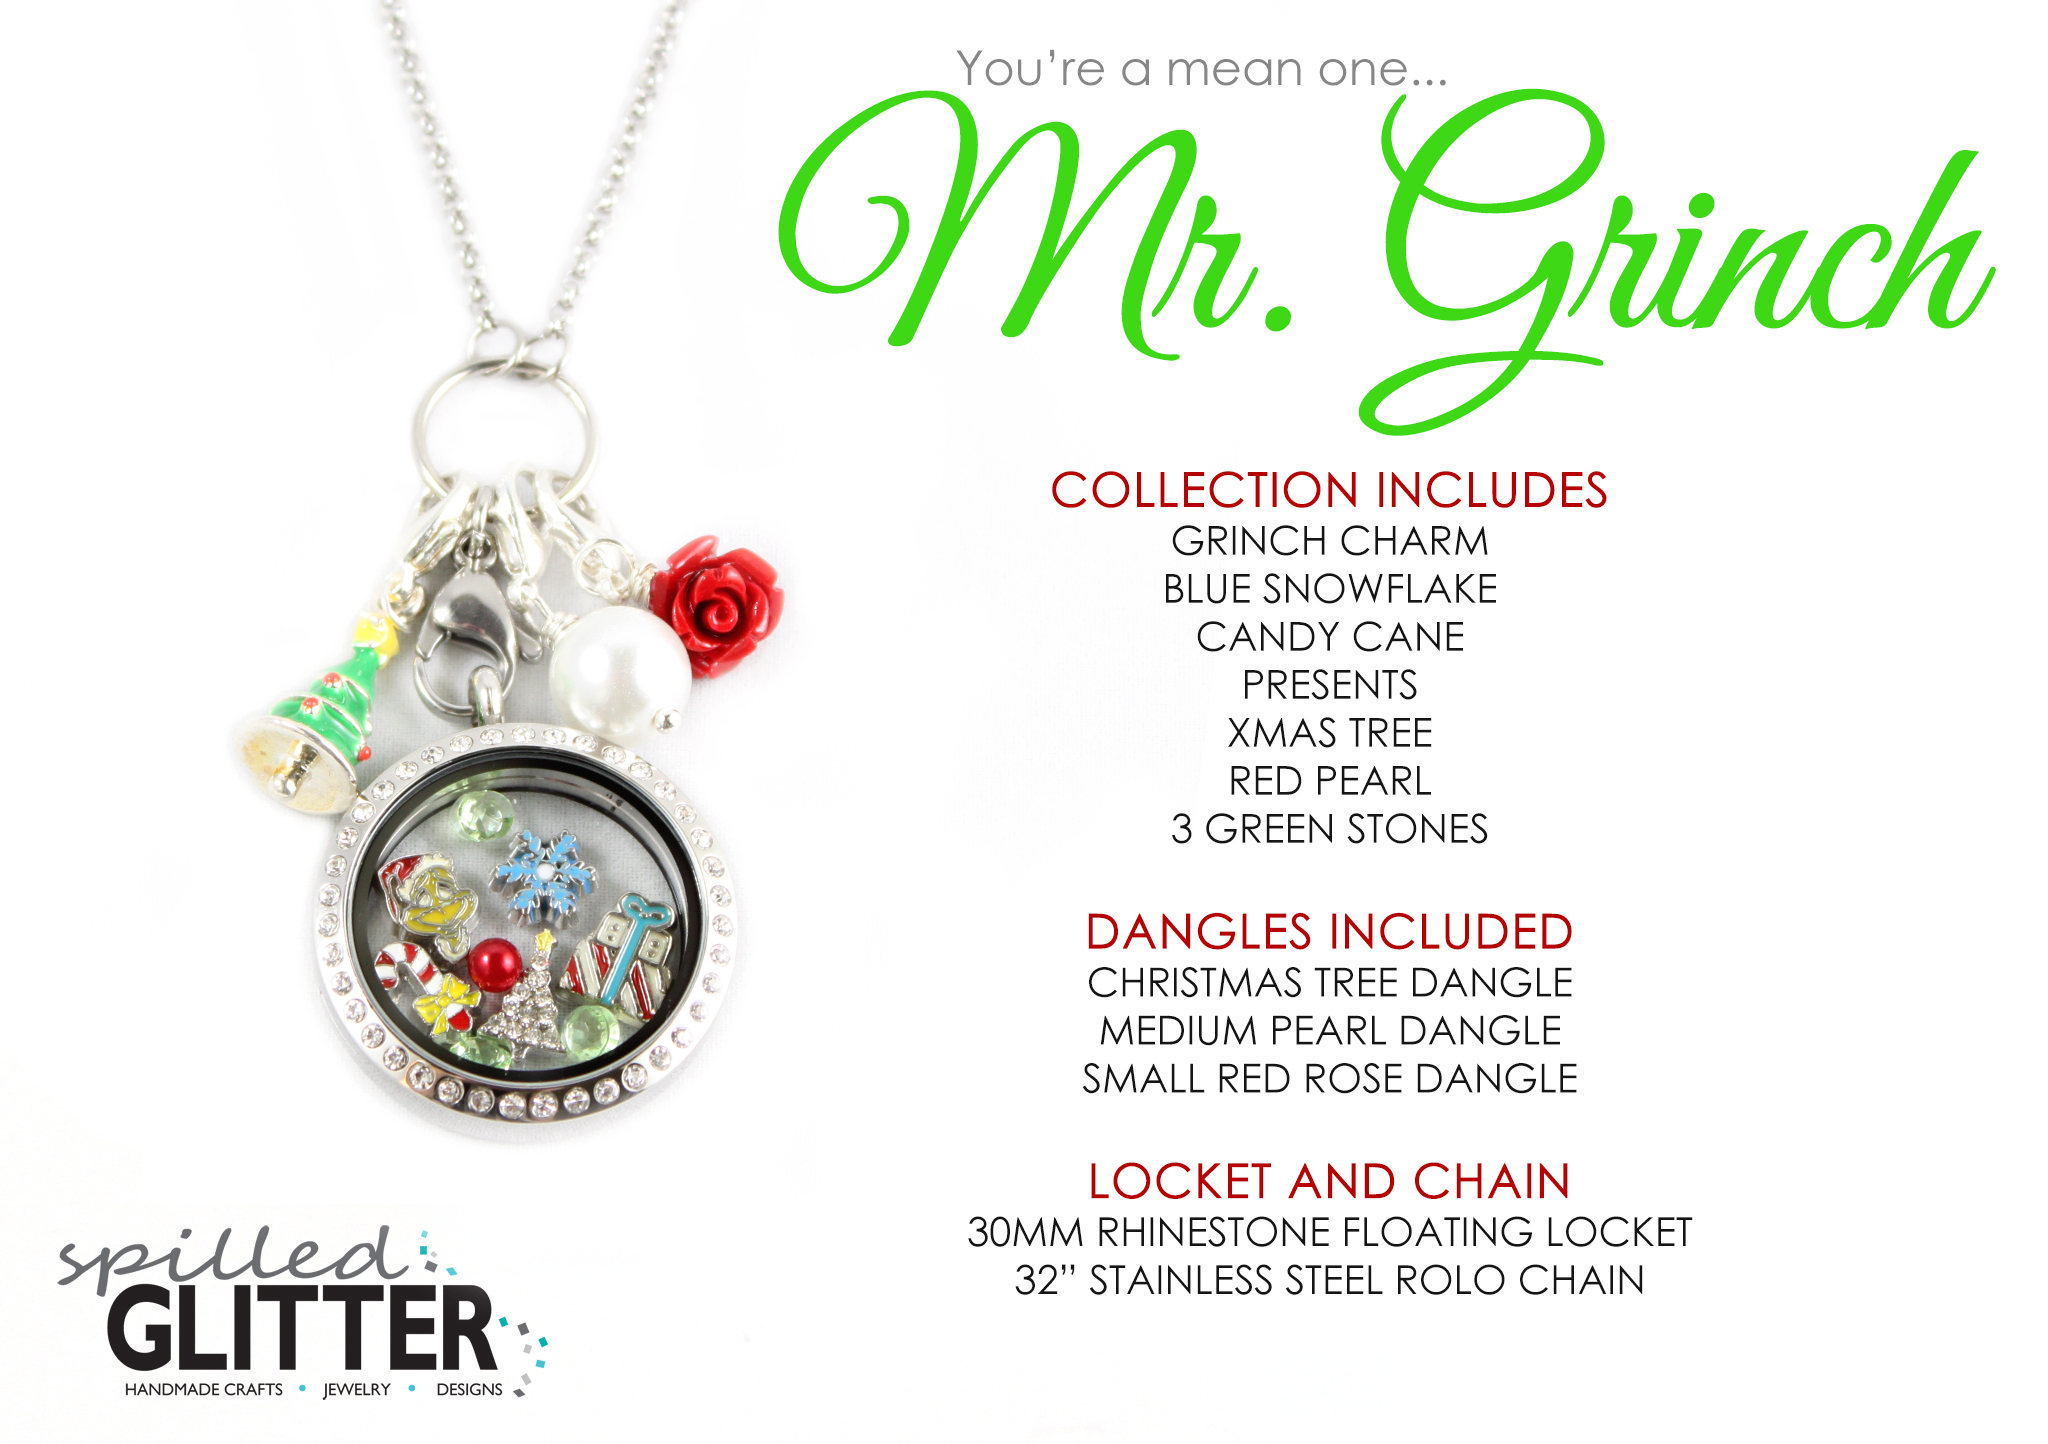 Origami Owl Dangle Bracelet Mr Grinch Christmas Holiday Floating Locket And Charm Collection